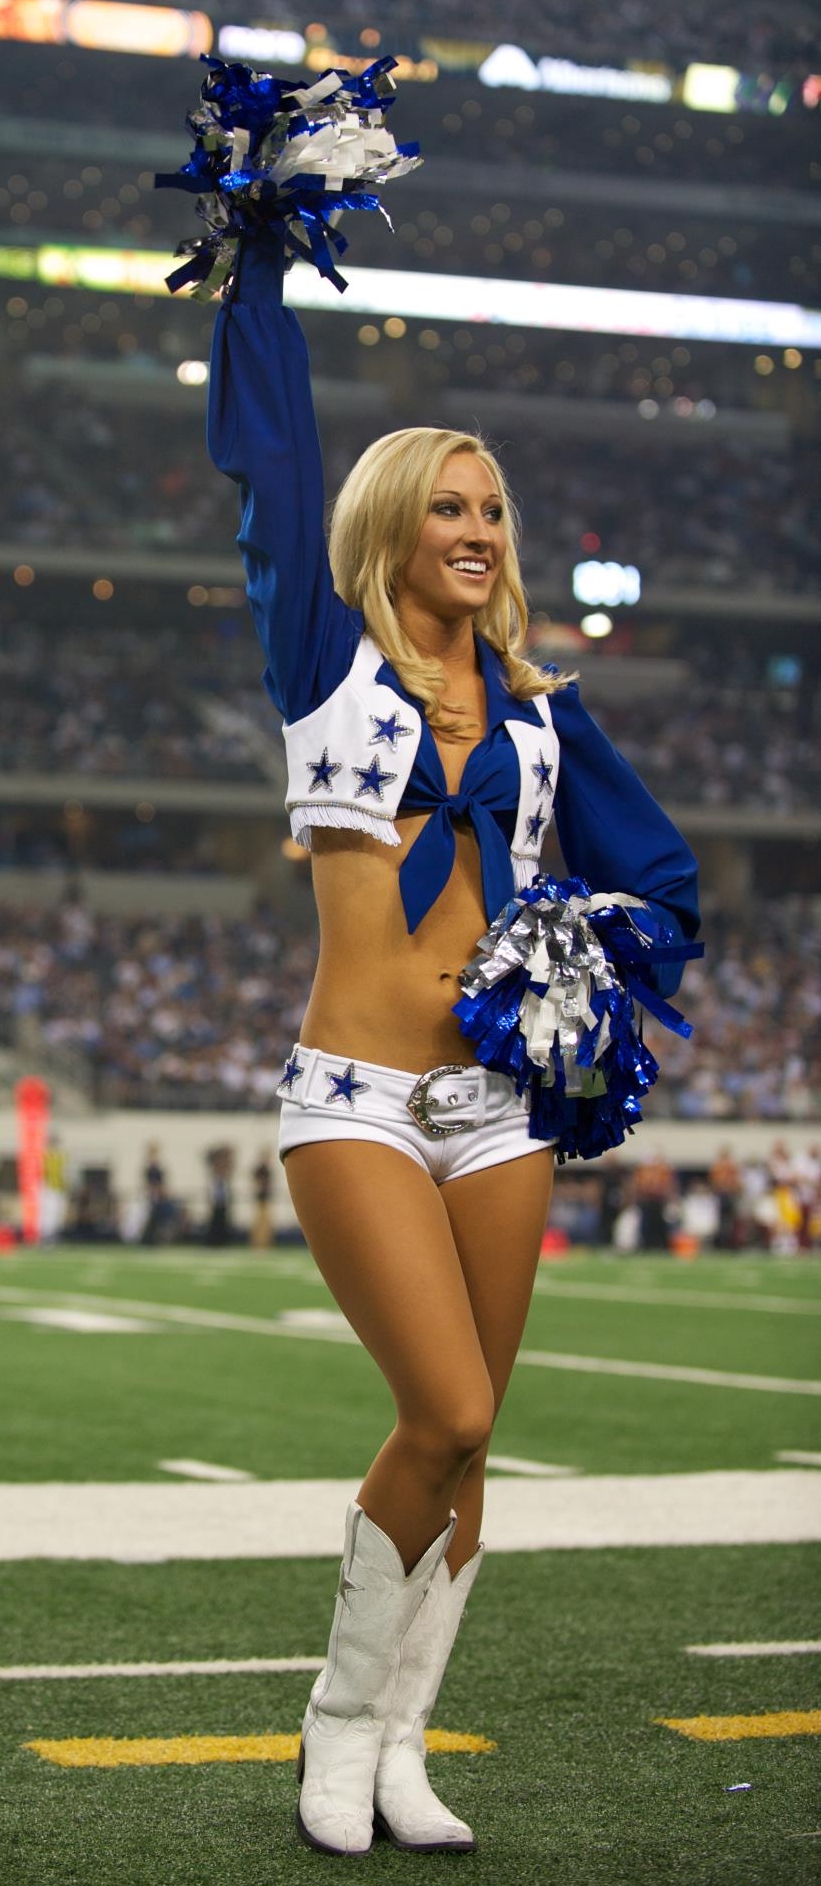 Blonde Cheerleader with Bare Legs wearing White Boots and Shorts